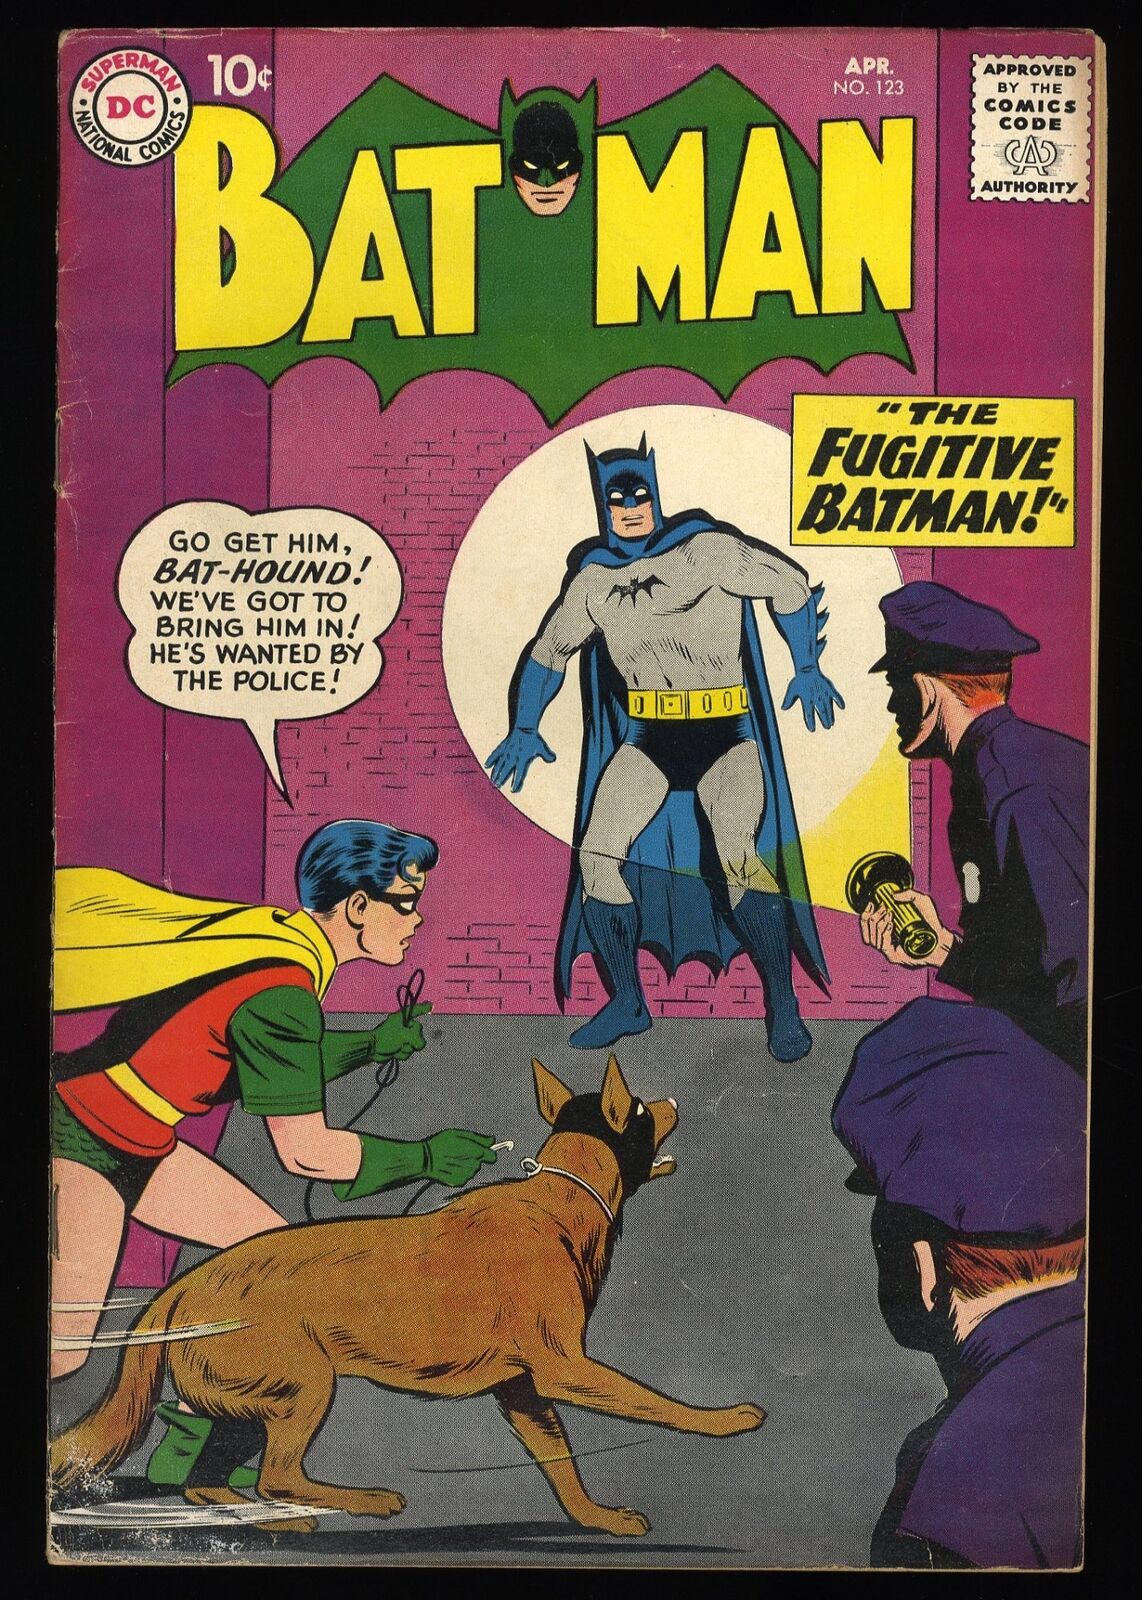 Batman #123 VG/FN 5.0 Bat-Hound Ad for Brave and the Bold #23 DC Comics 1959